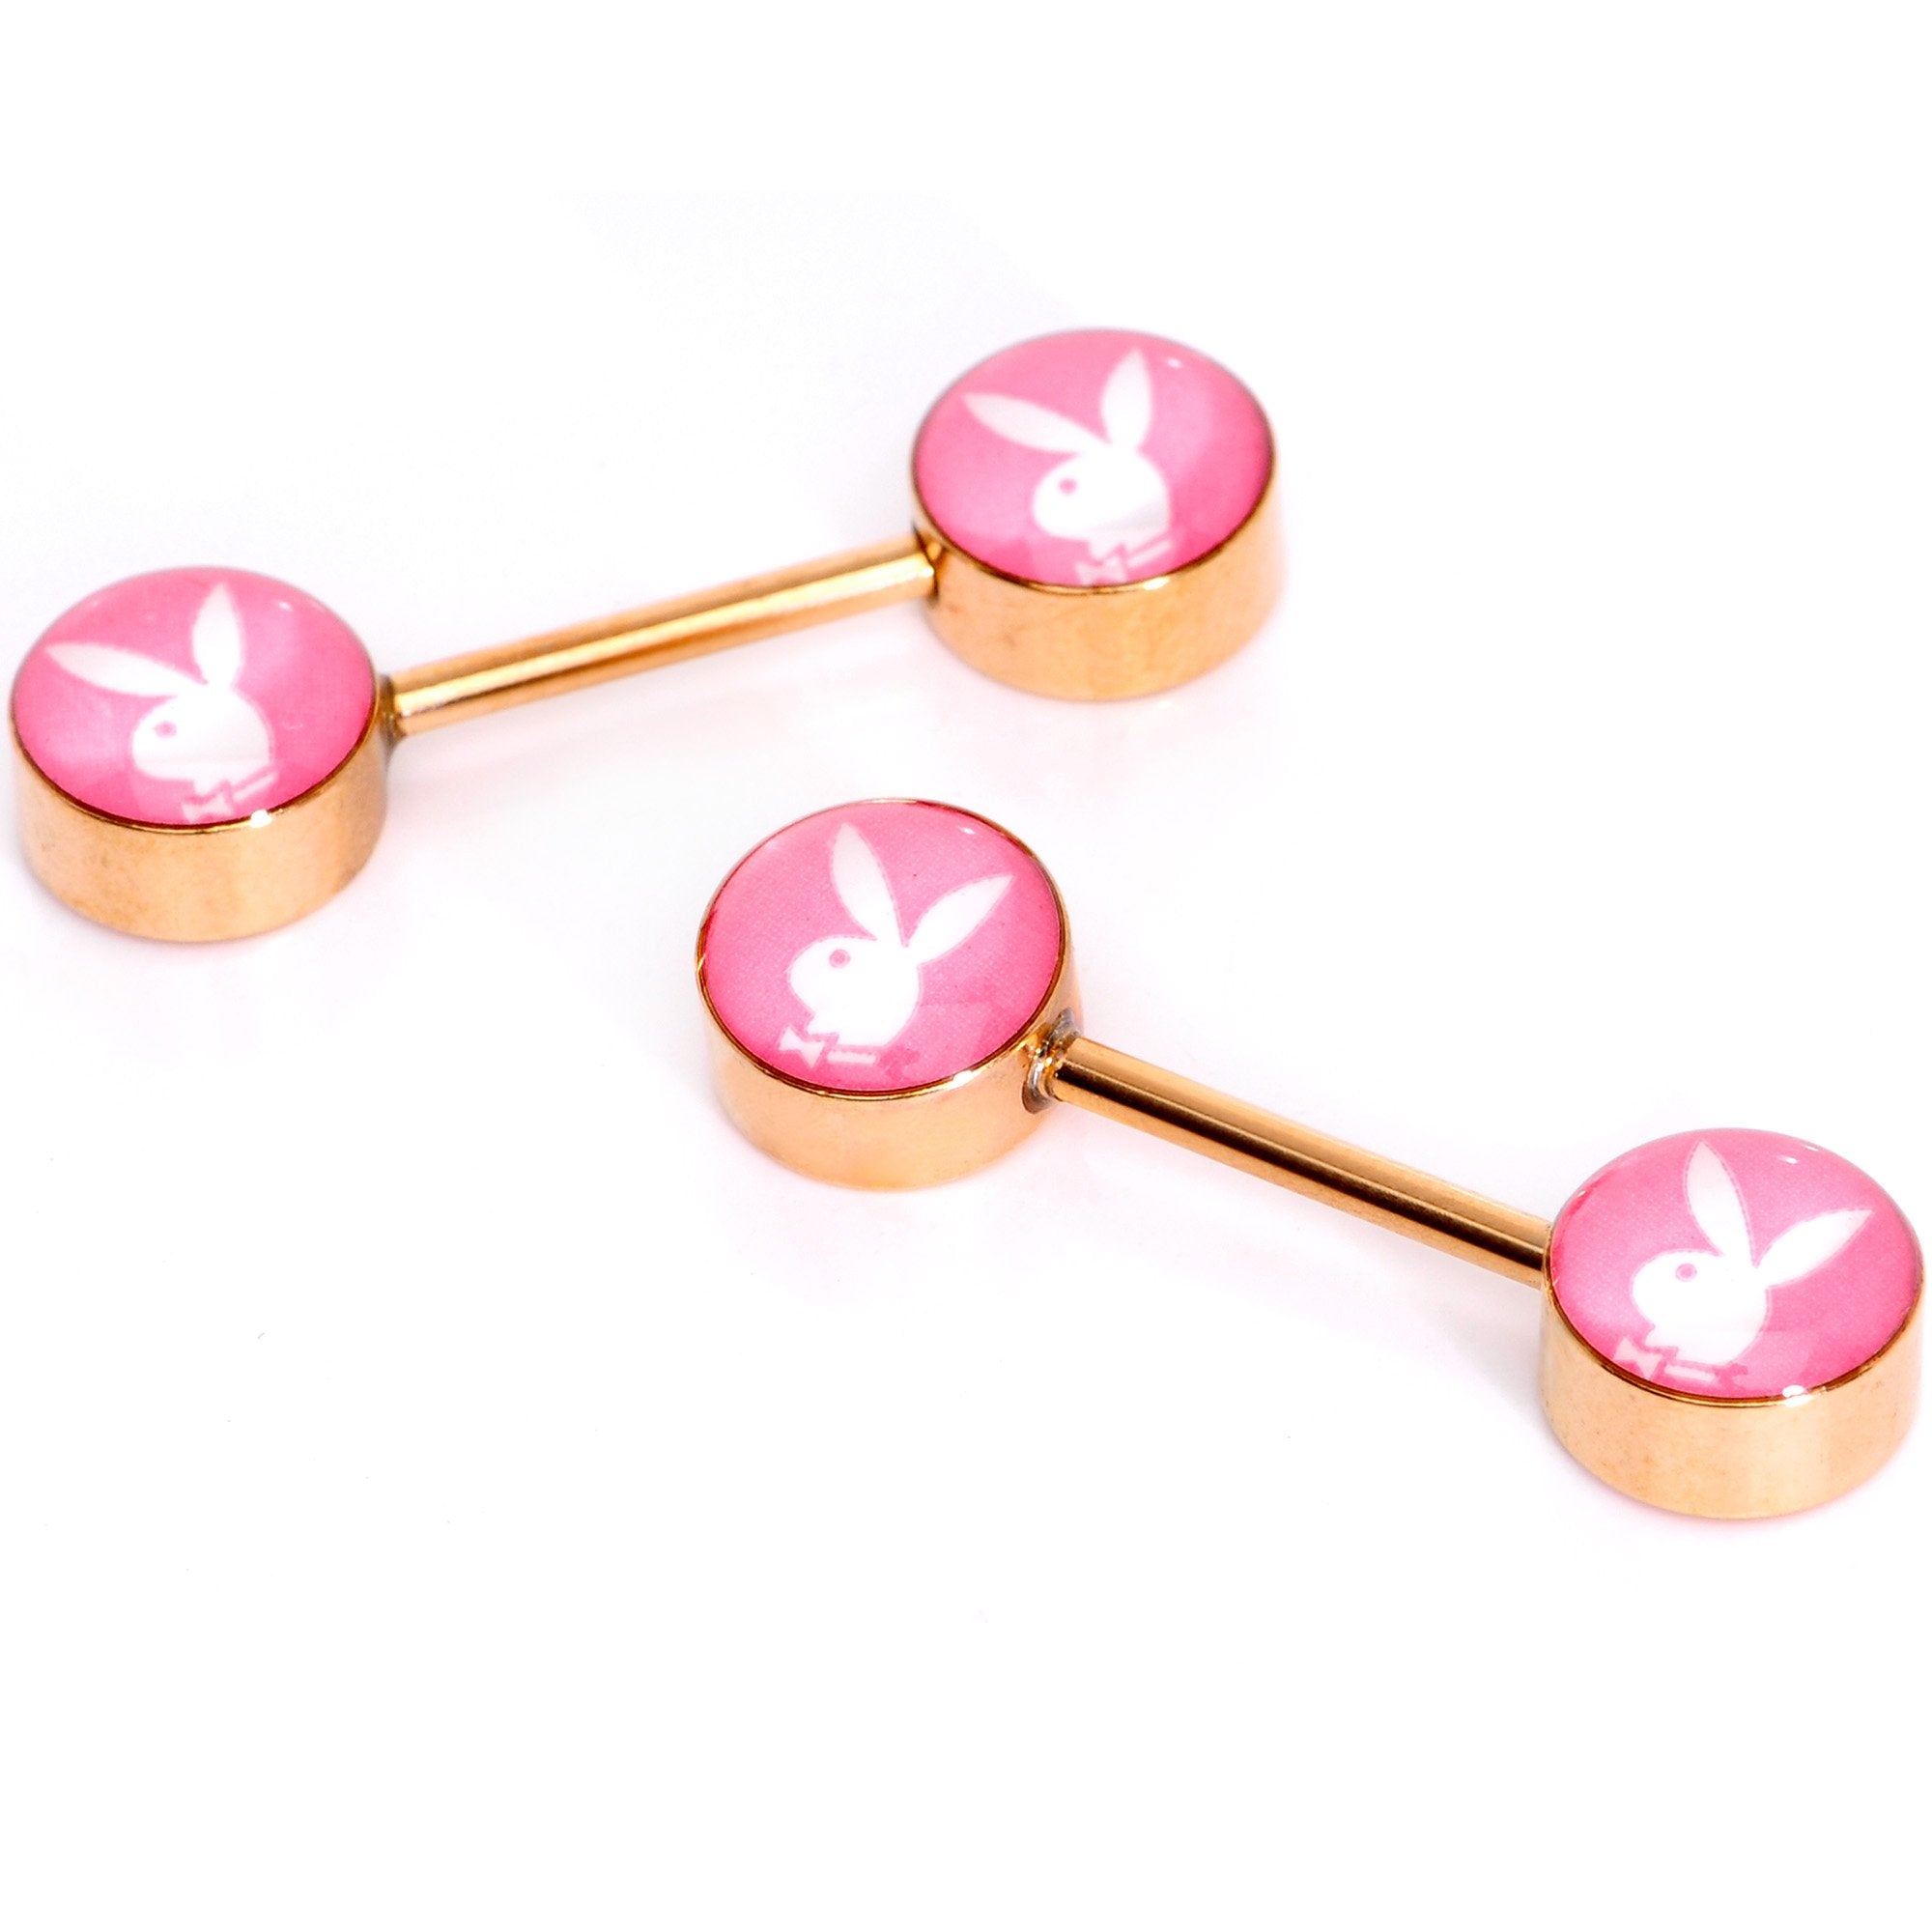 Licensed Pink White Playboy Bunny Gold Tone Barbell Nipple Ring Set